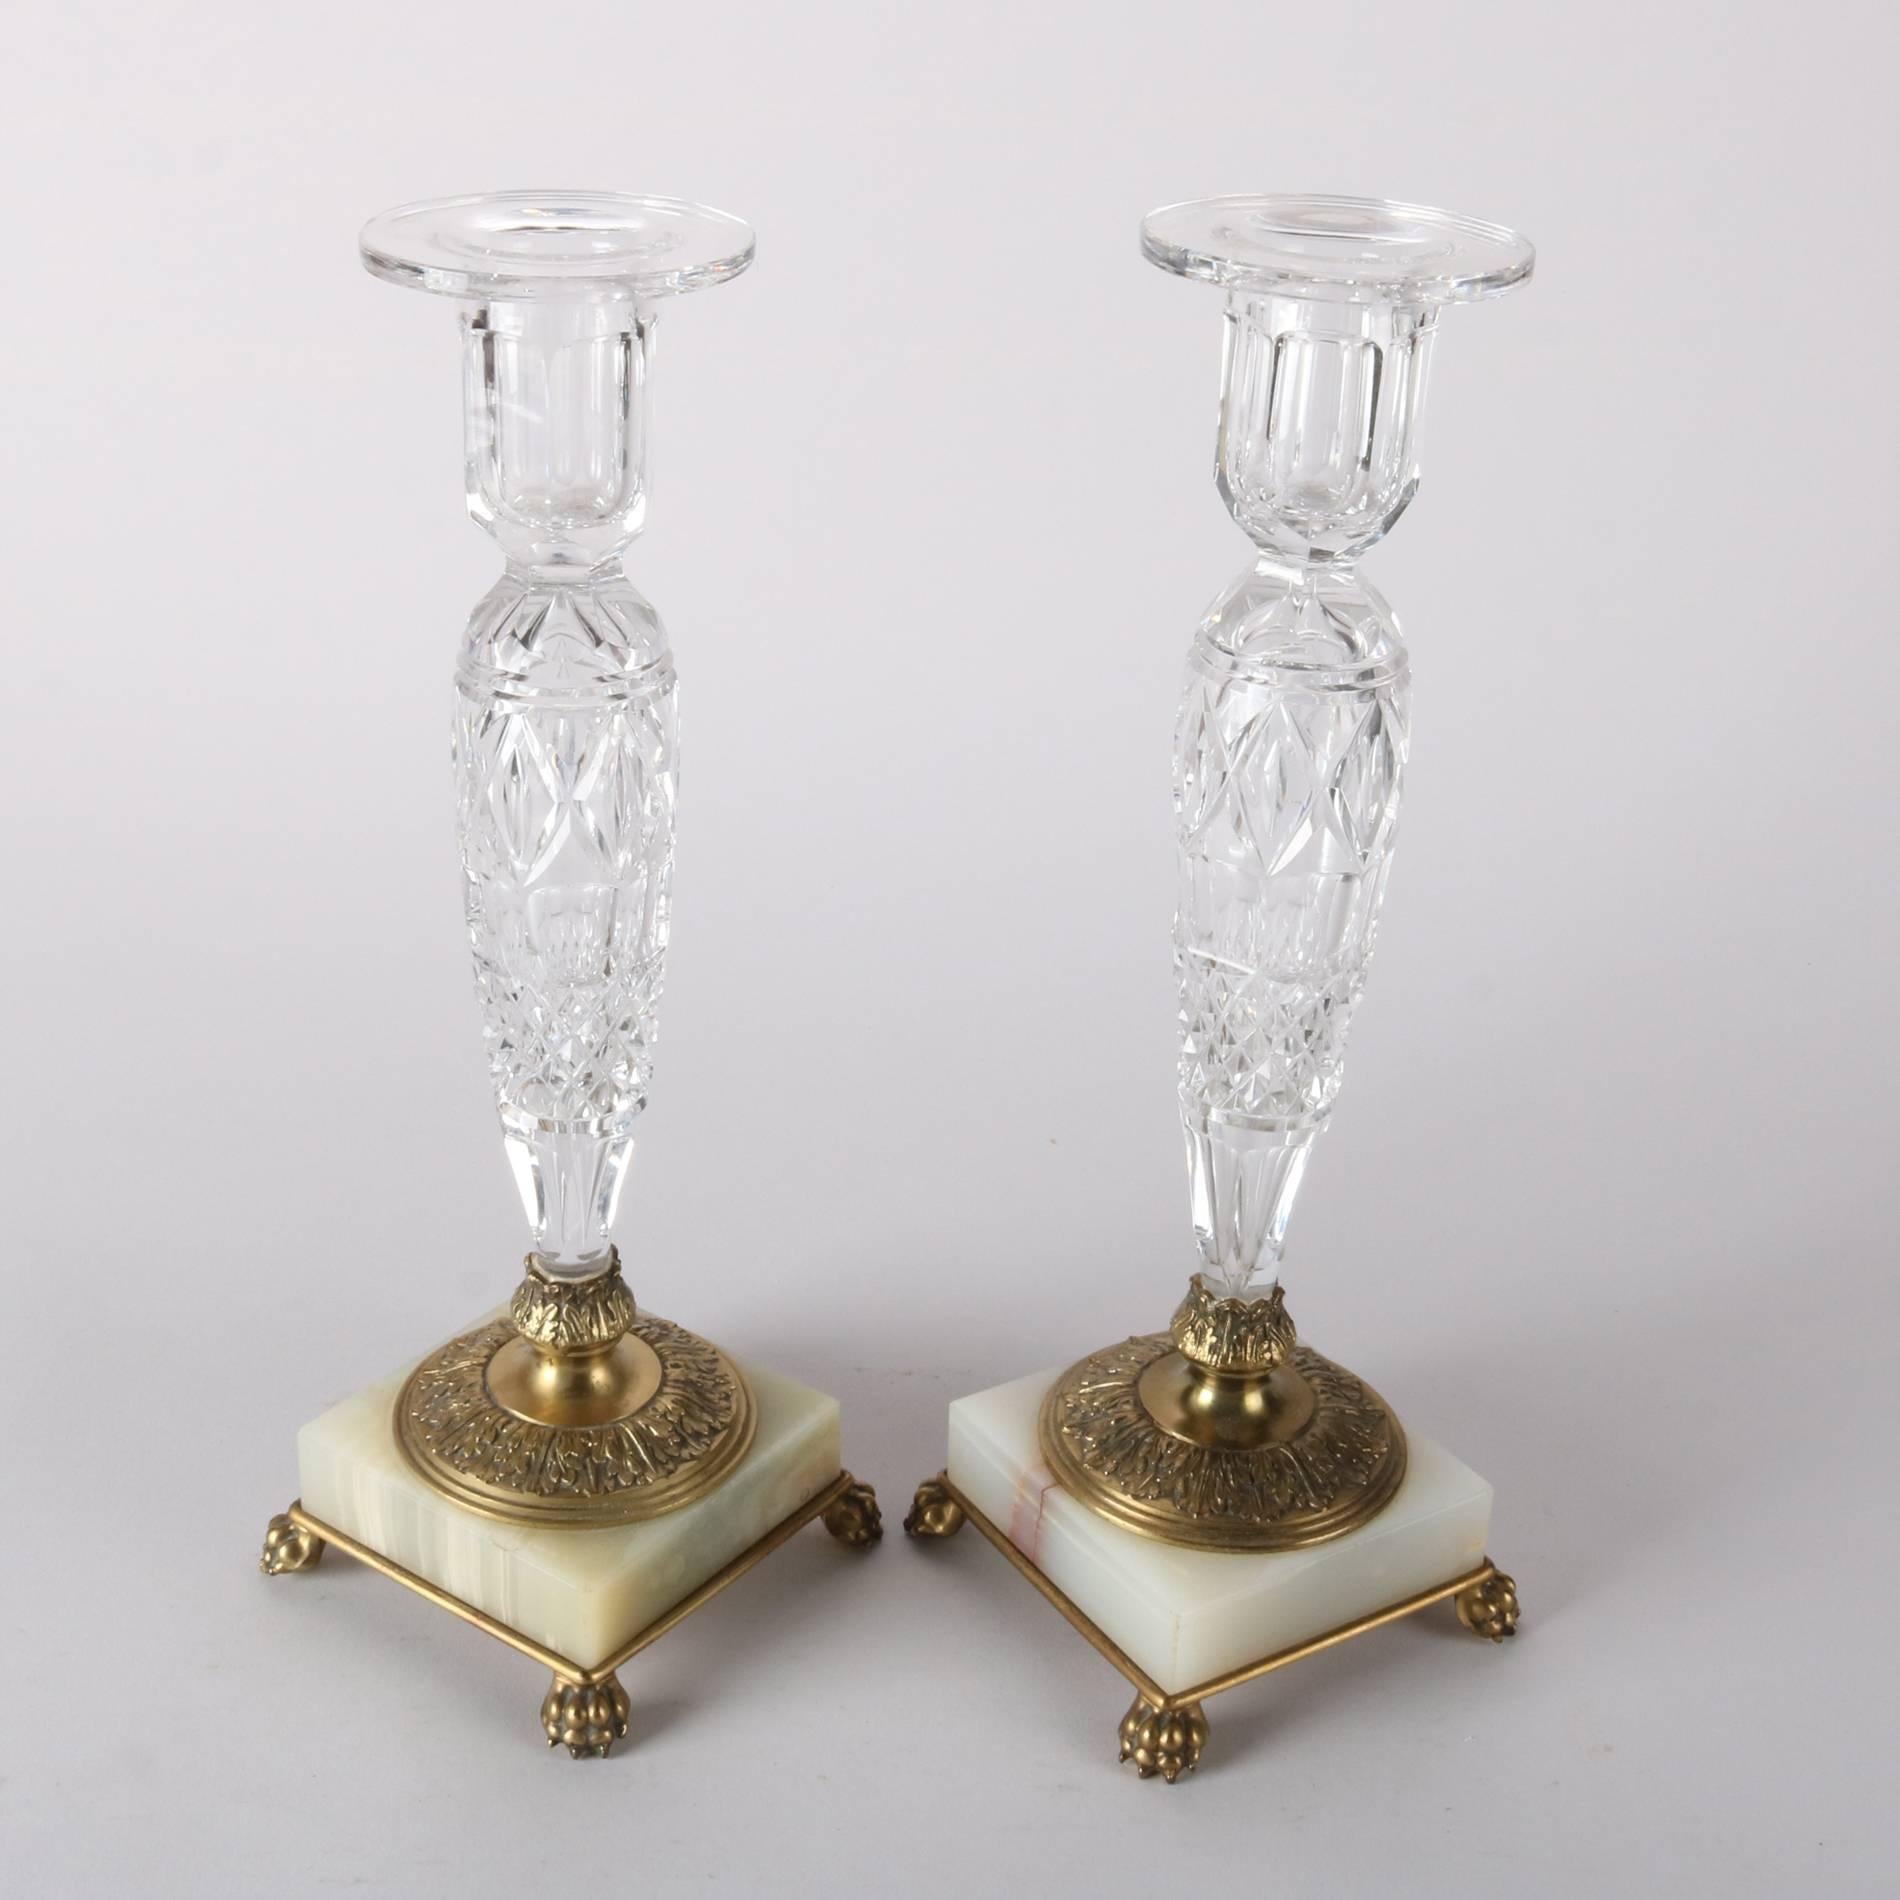 Pair of Antique Pairpoint Cut Crystal, Onyx and Brass Footed Candle Sticks 2